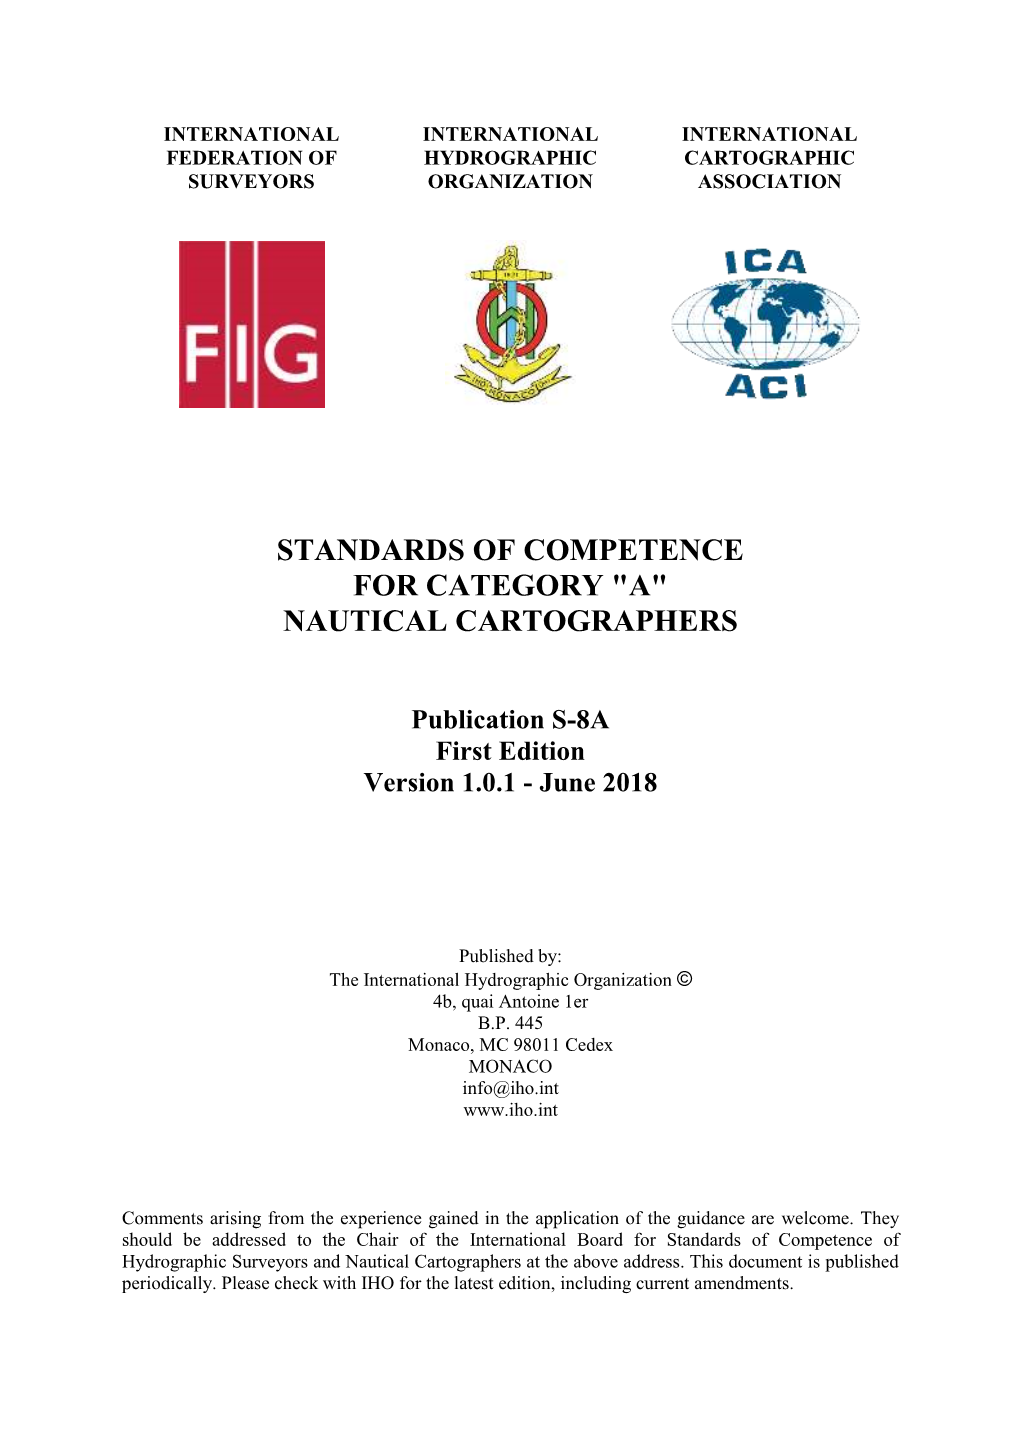 Standards of Competence for Category "A" Nautical Cartographers